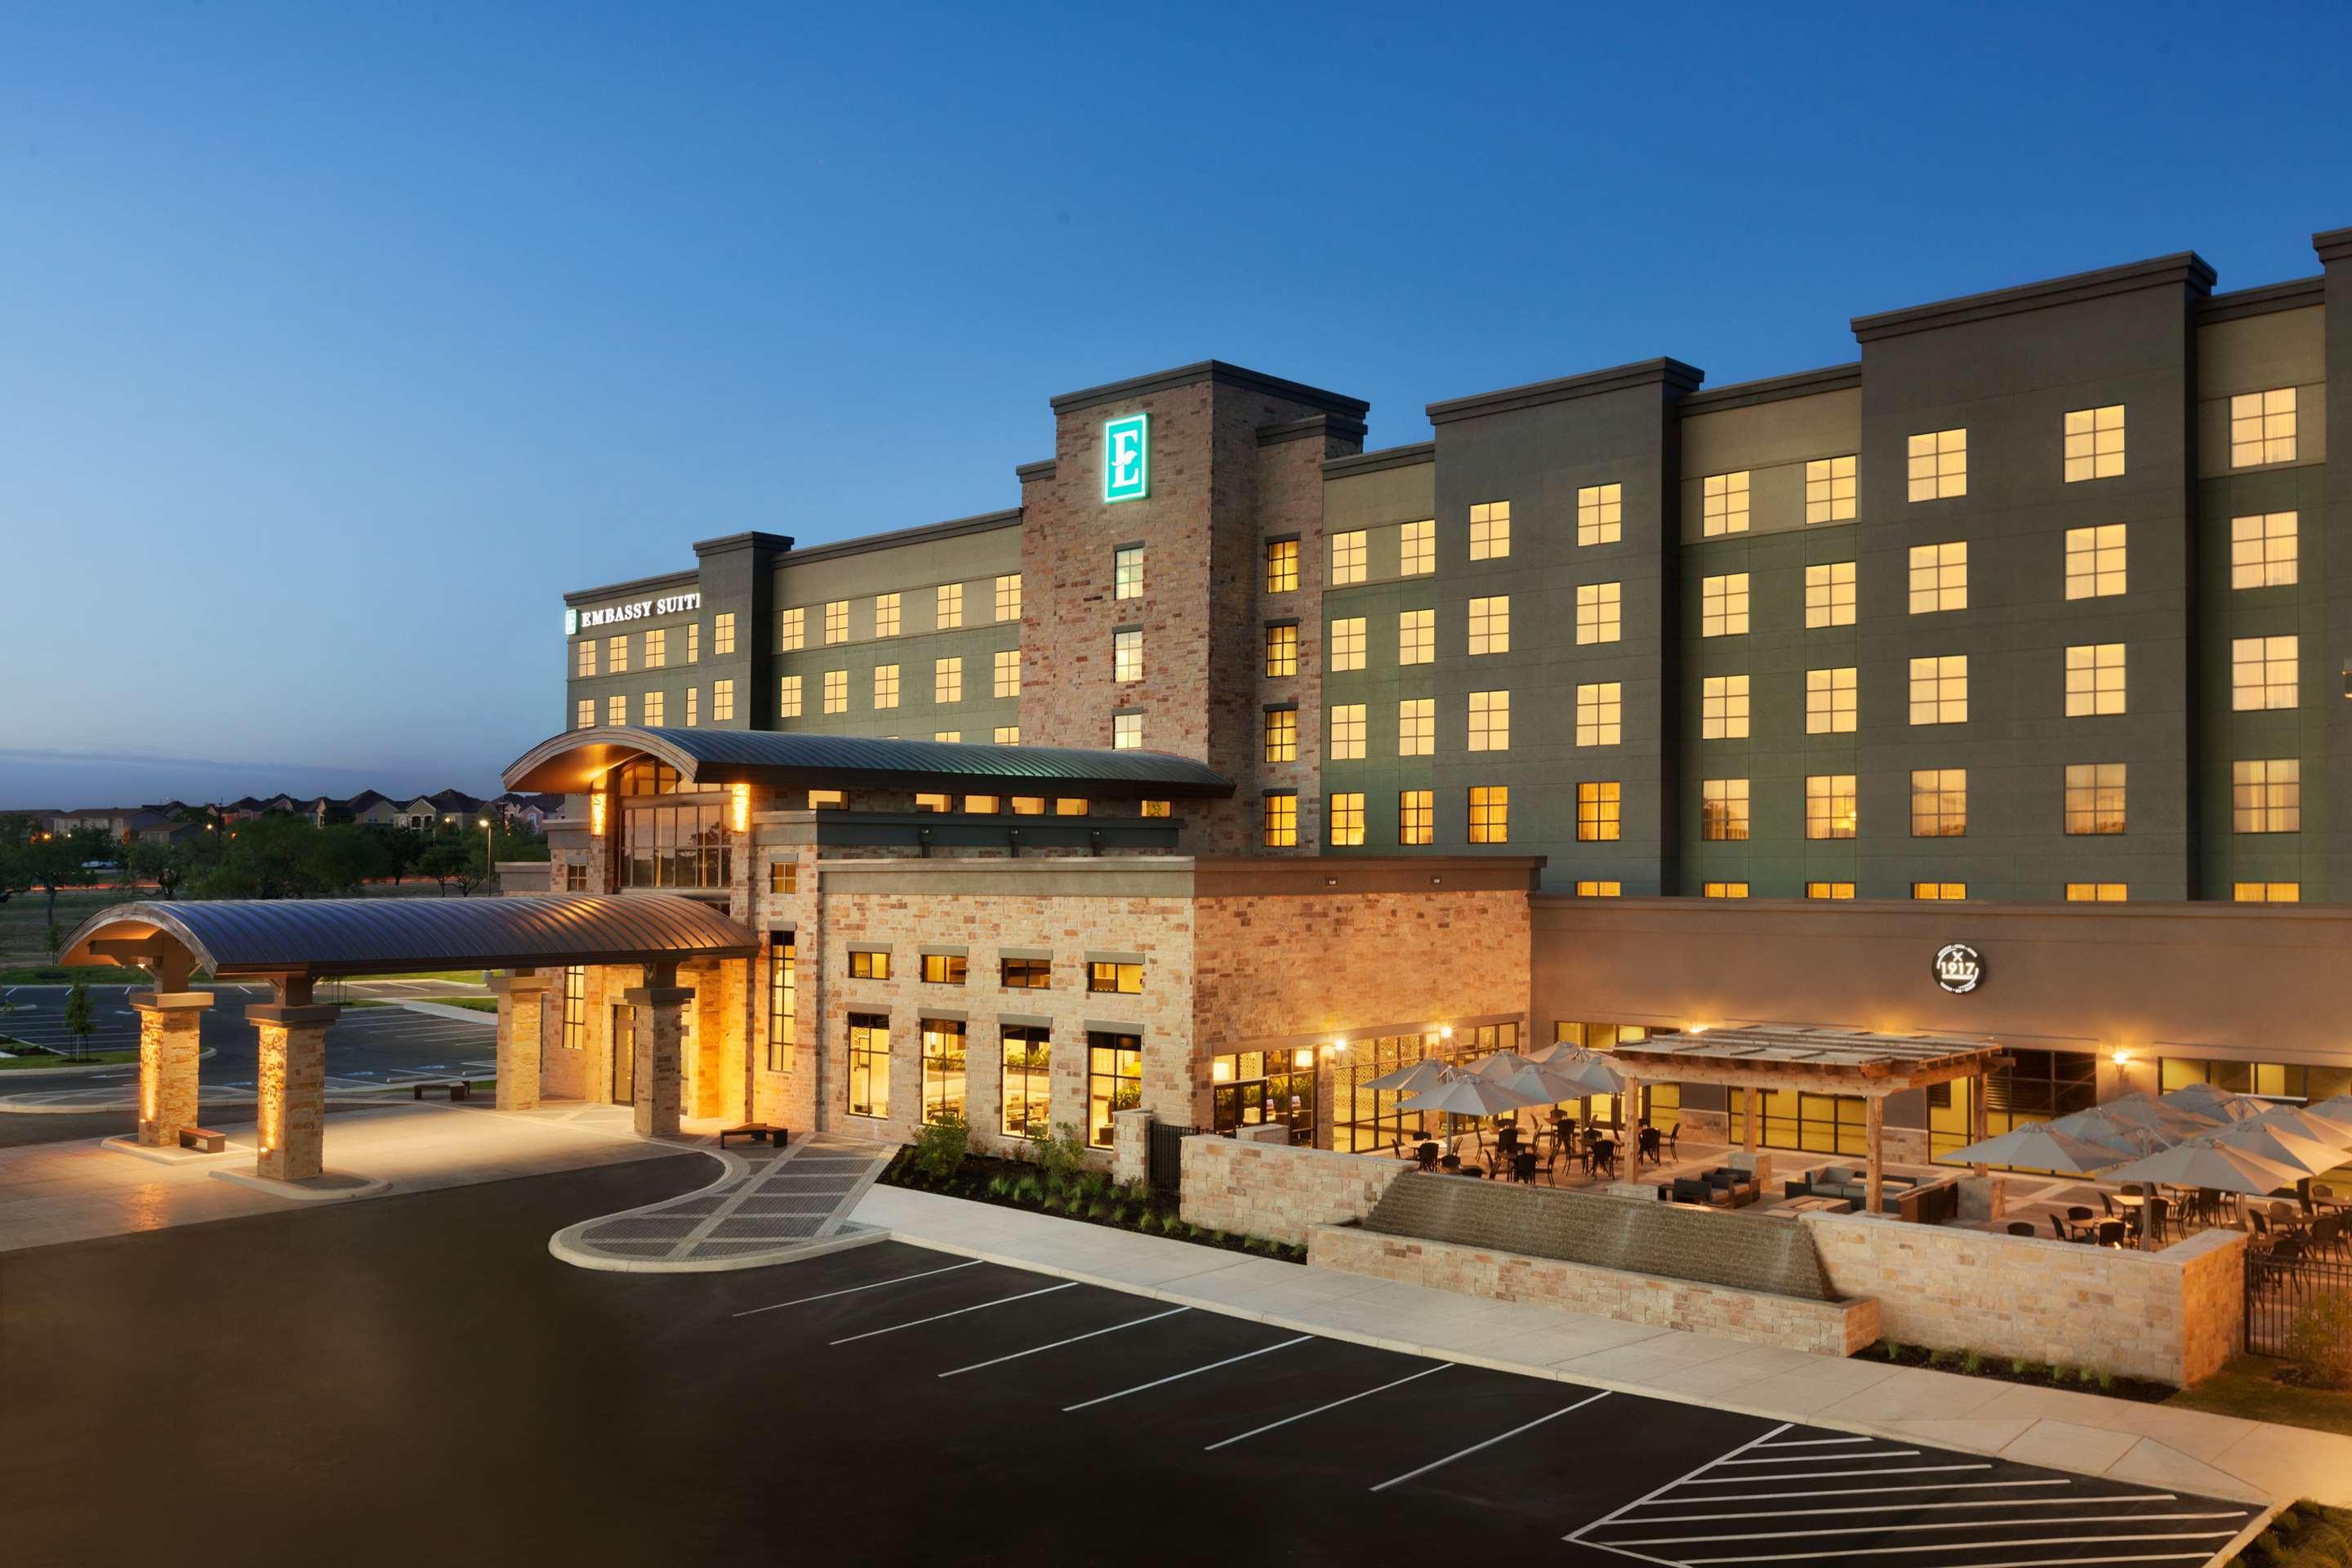 Building view of Embassy Suites by Hilton San Antonio Brooks Hotel & Spa